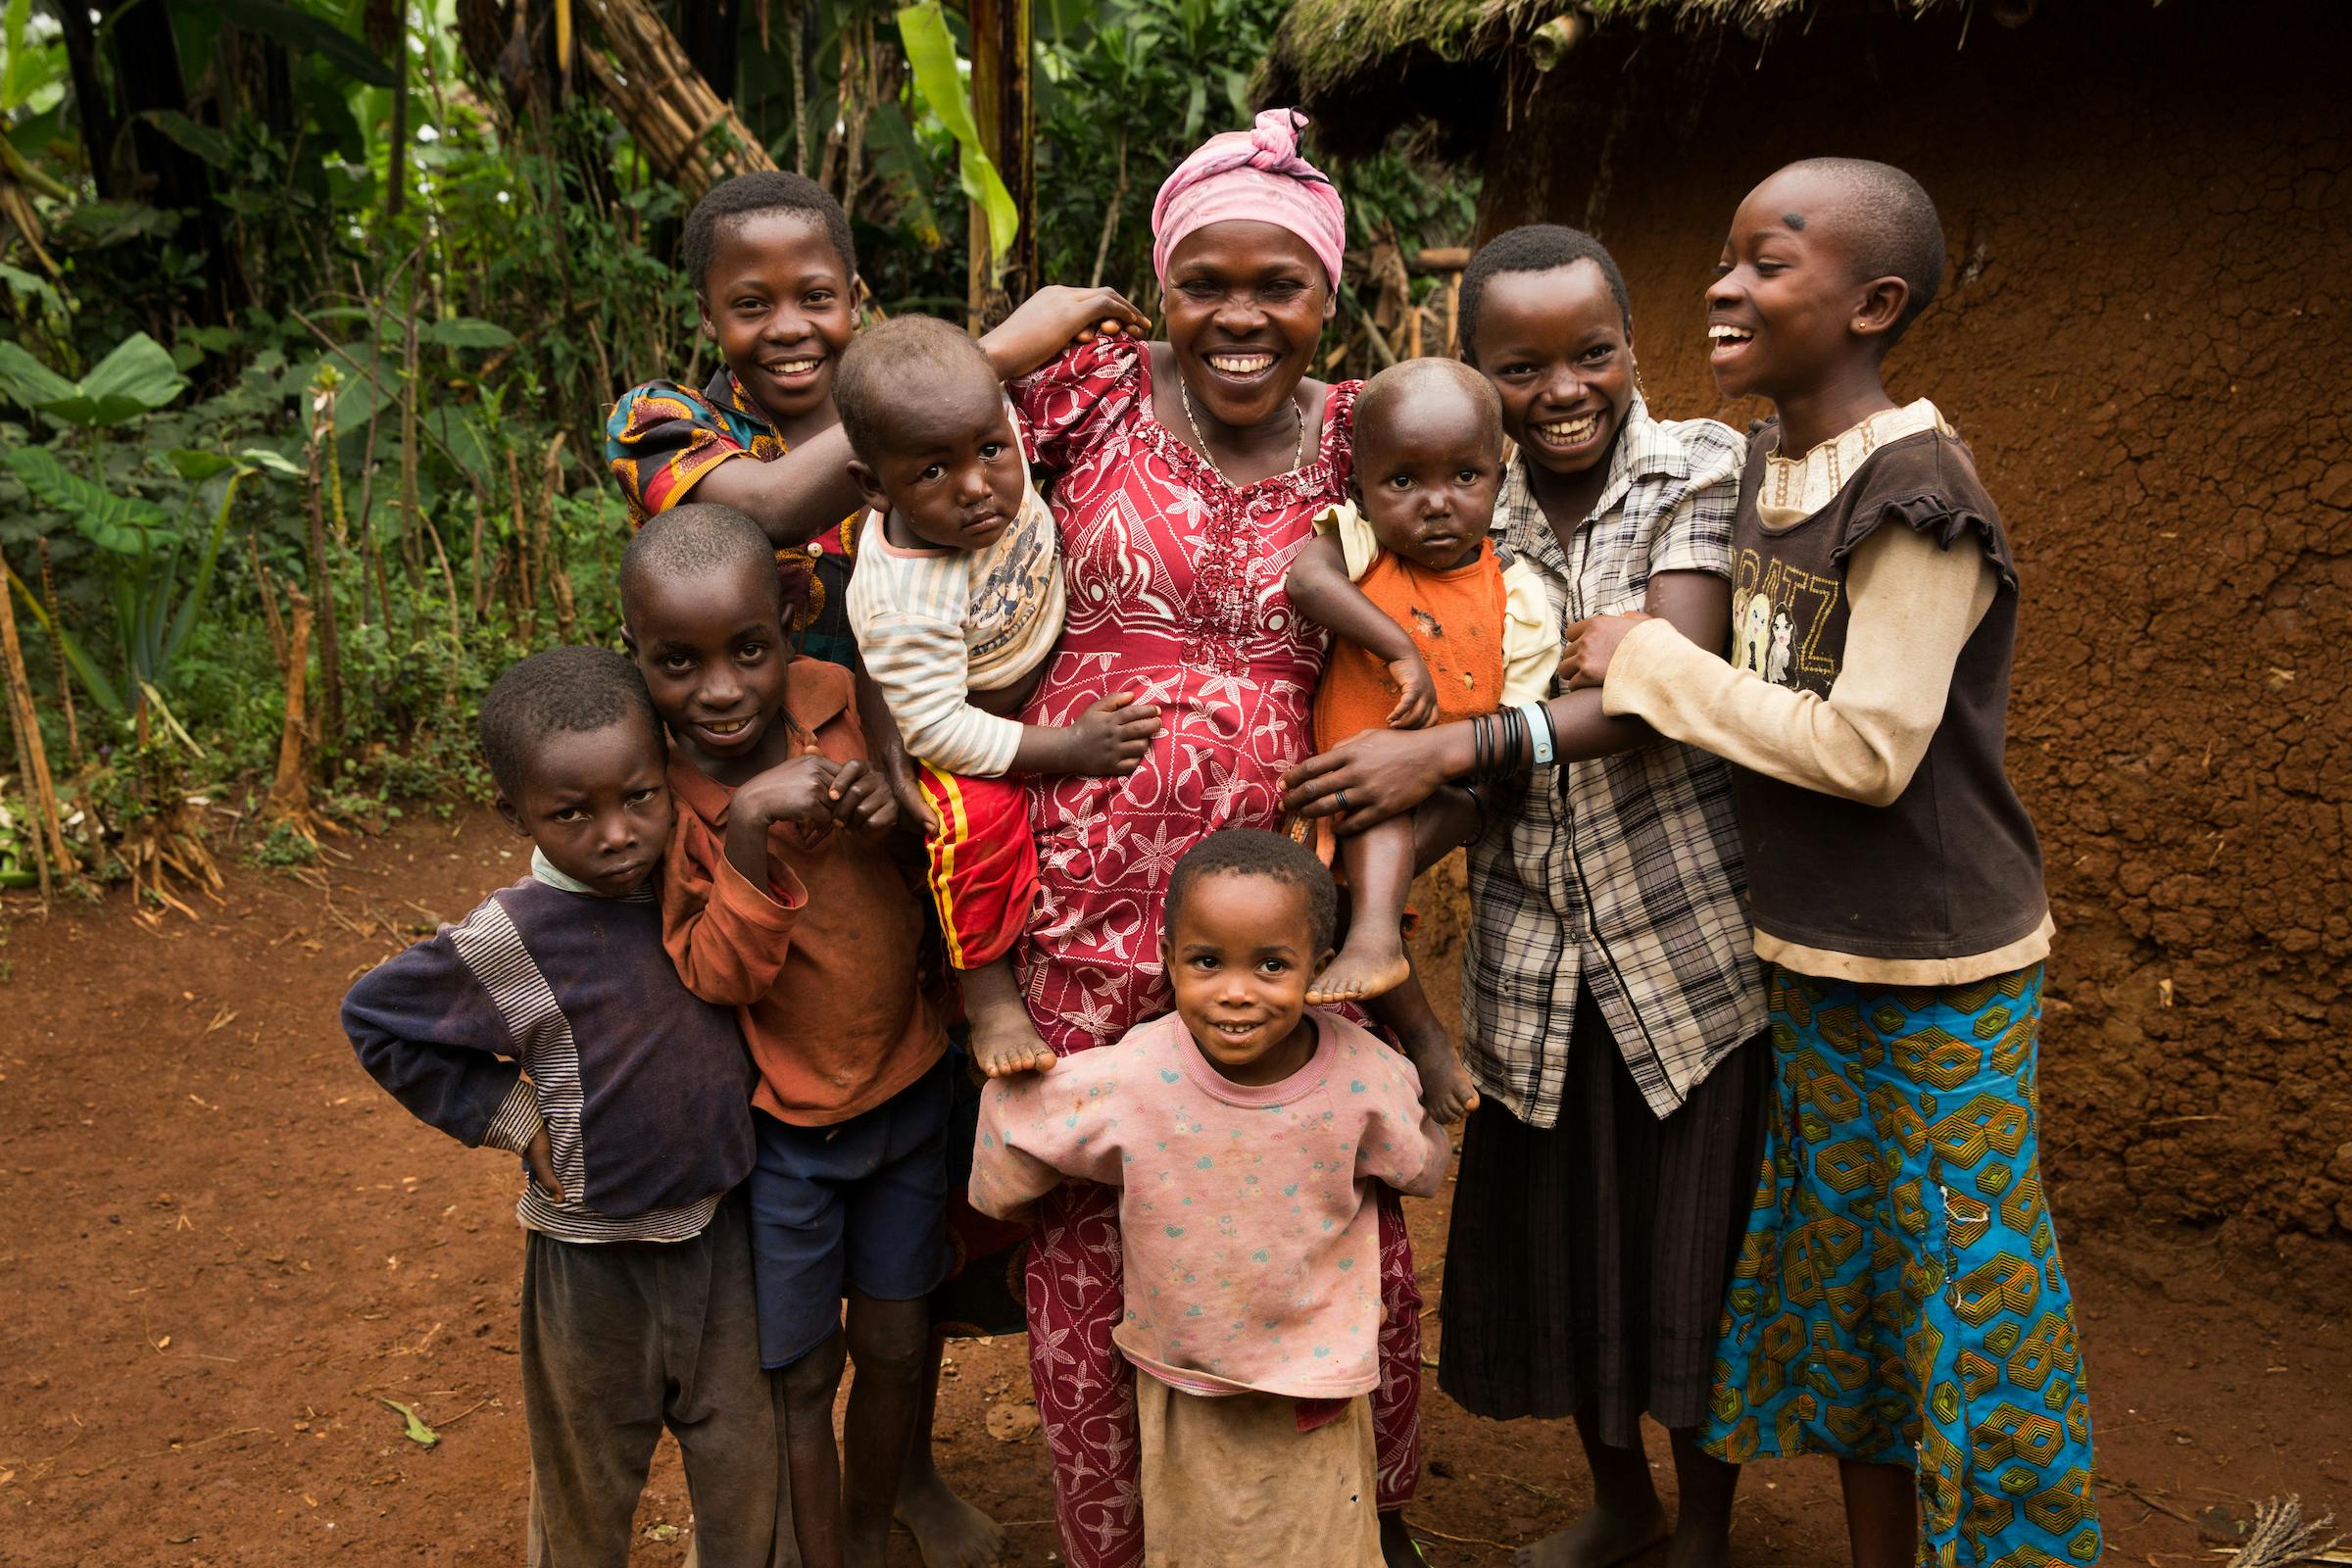 International Womens Day Photoessay - Mother in the Democratic Republic of Congo smiles next to her large family of children